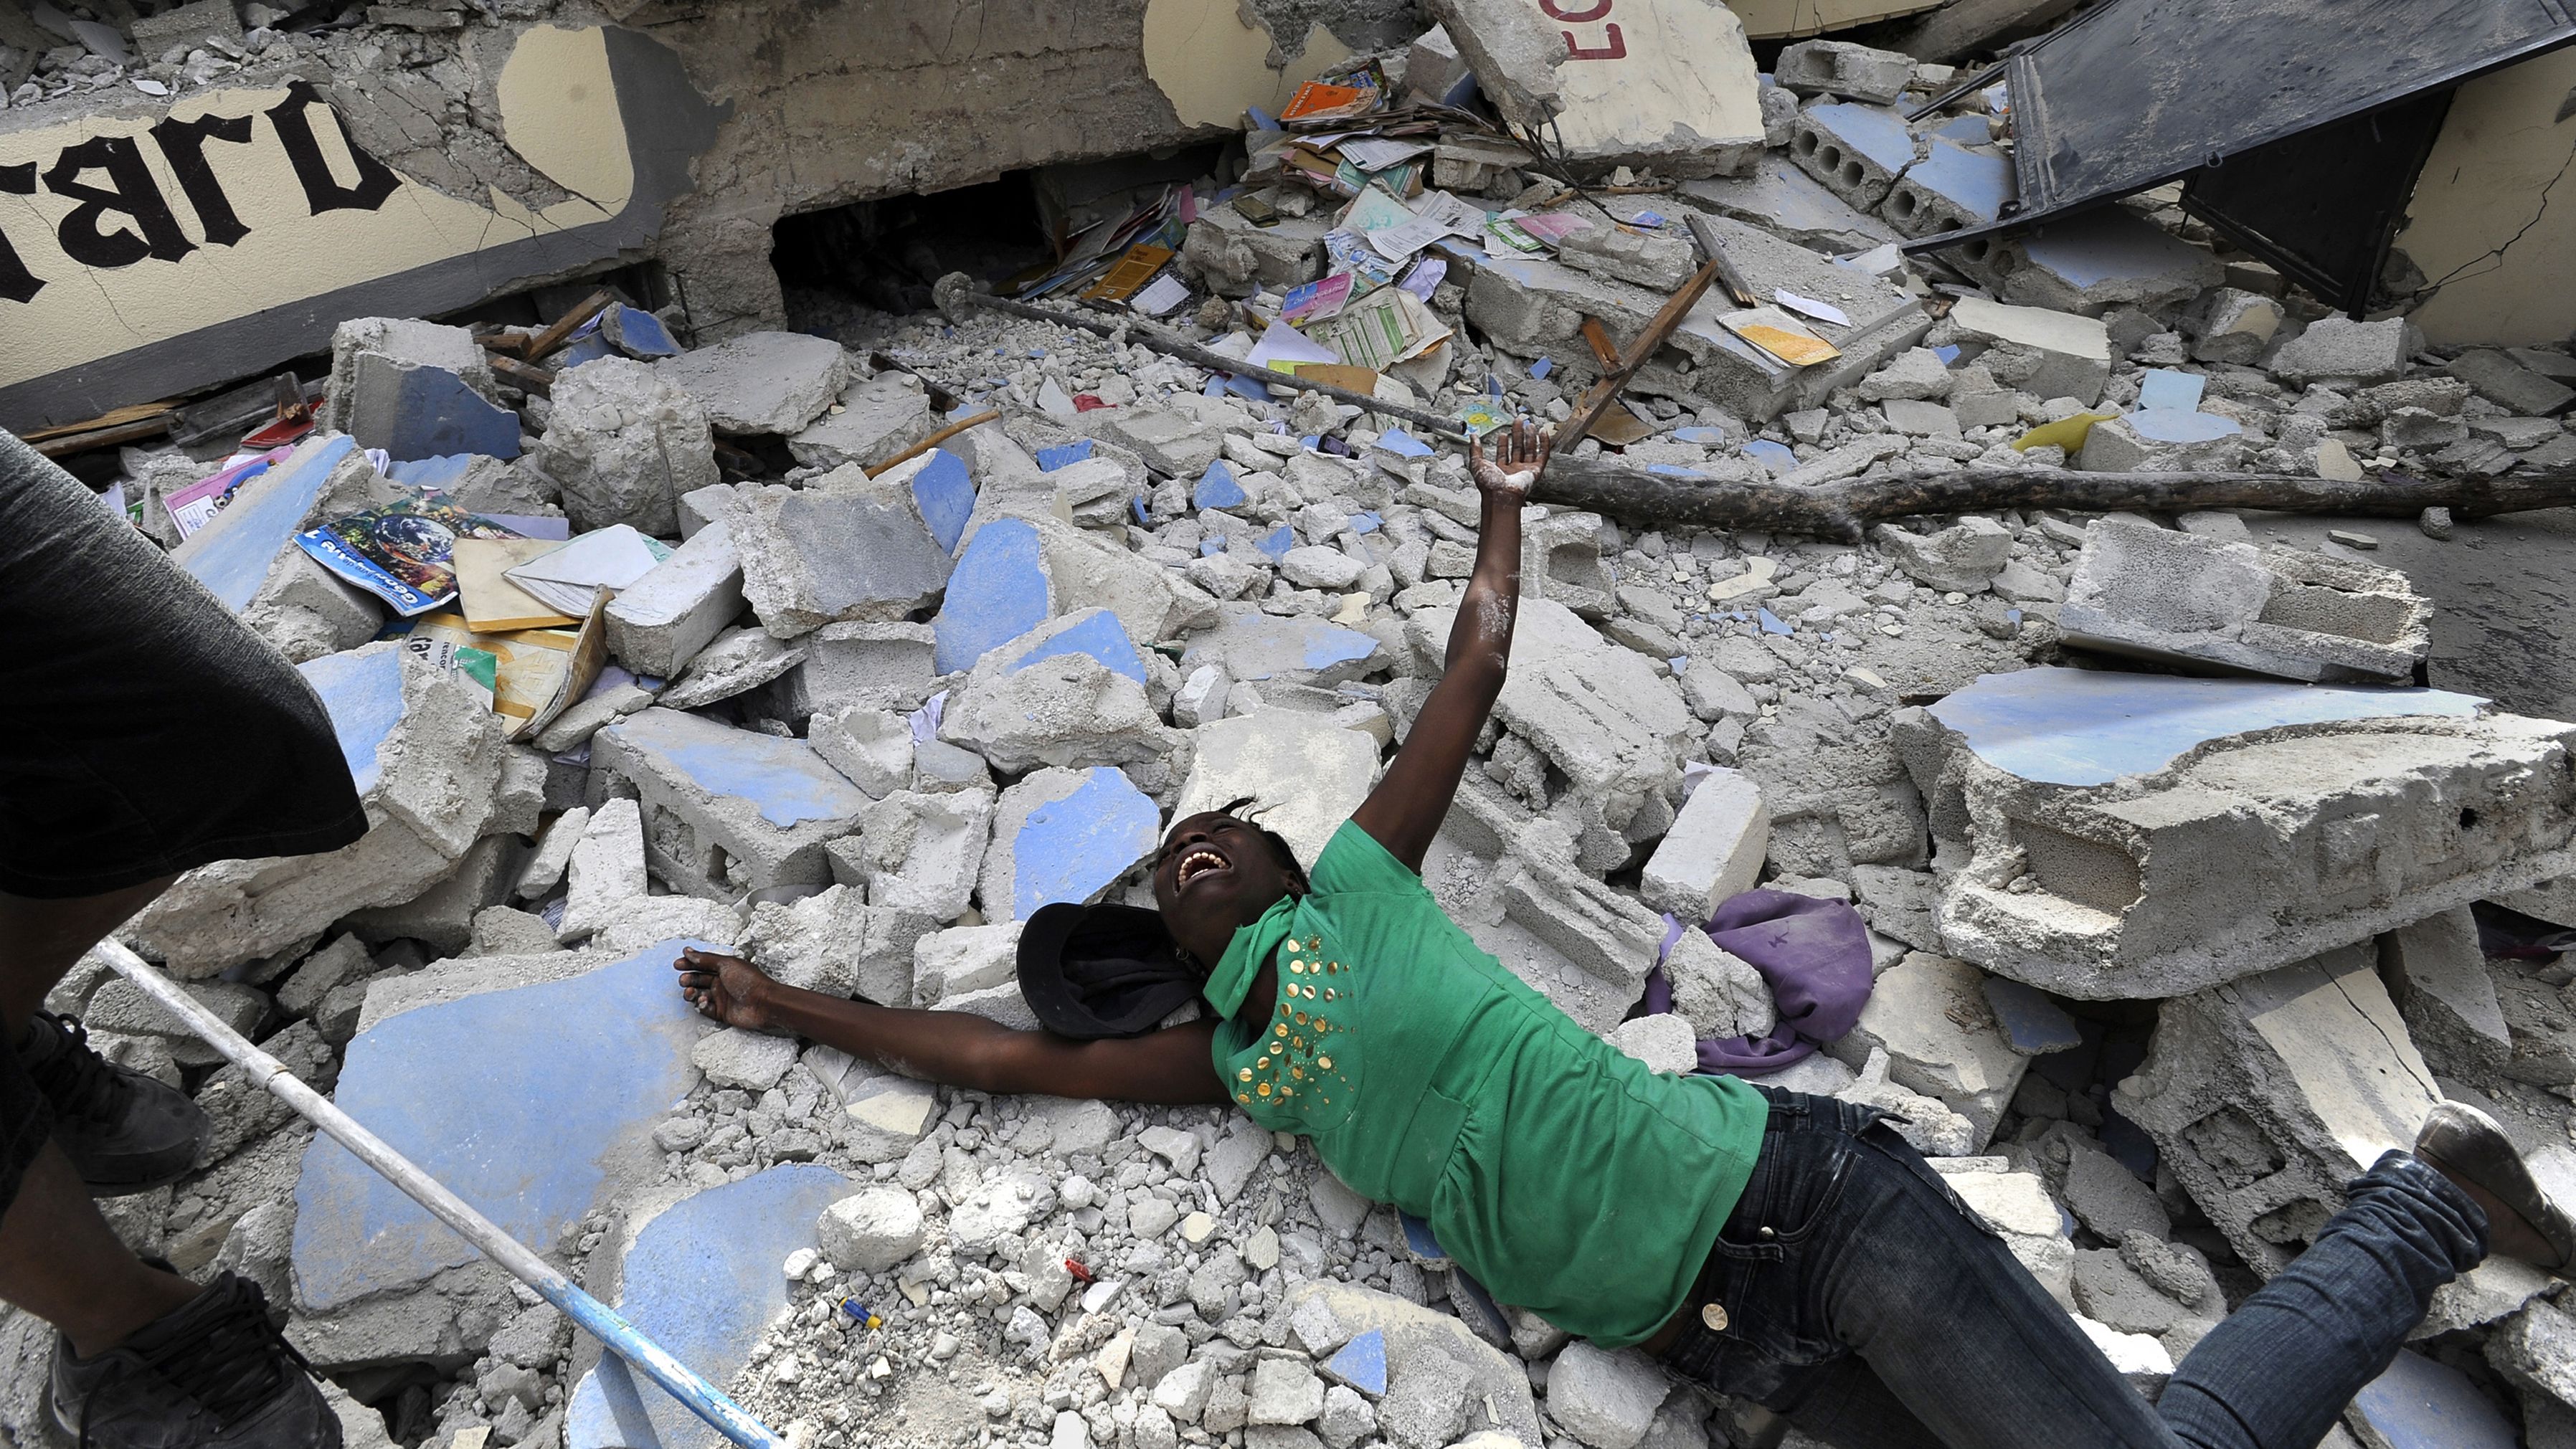 Cindy Tersme throws herself on the rubble of Ecole St. Gerard, a school in Port-au-Prince, Haiti, after <a href="https://www.cnn.com/2013/12/12/world/haiti-earthquake-fast-facts/index.html" target="_blank">a 7.0 magnitude earthquake hit the country</a> in January 2010. Tersme screamed in anguish after finding the lifeless body of her 14-year-old brother, Jean Gaelle Dersmorne. "I can see my brother's feet but can't pull him out," she said, weeping. The earthquake's death toll has been estimated at 220,000-300,000.